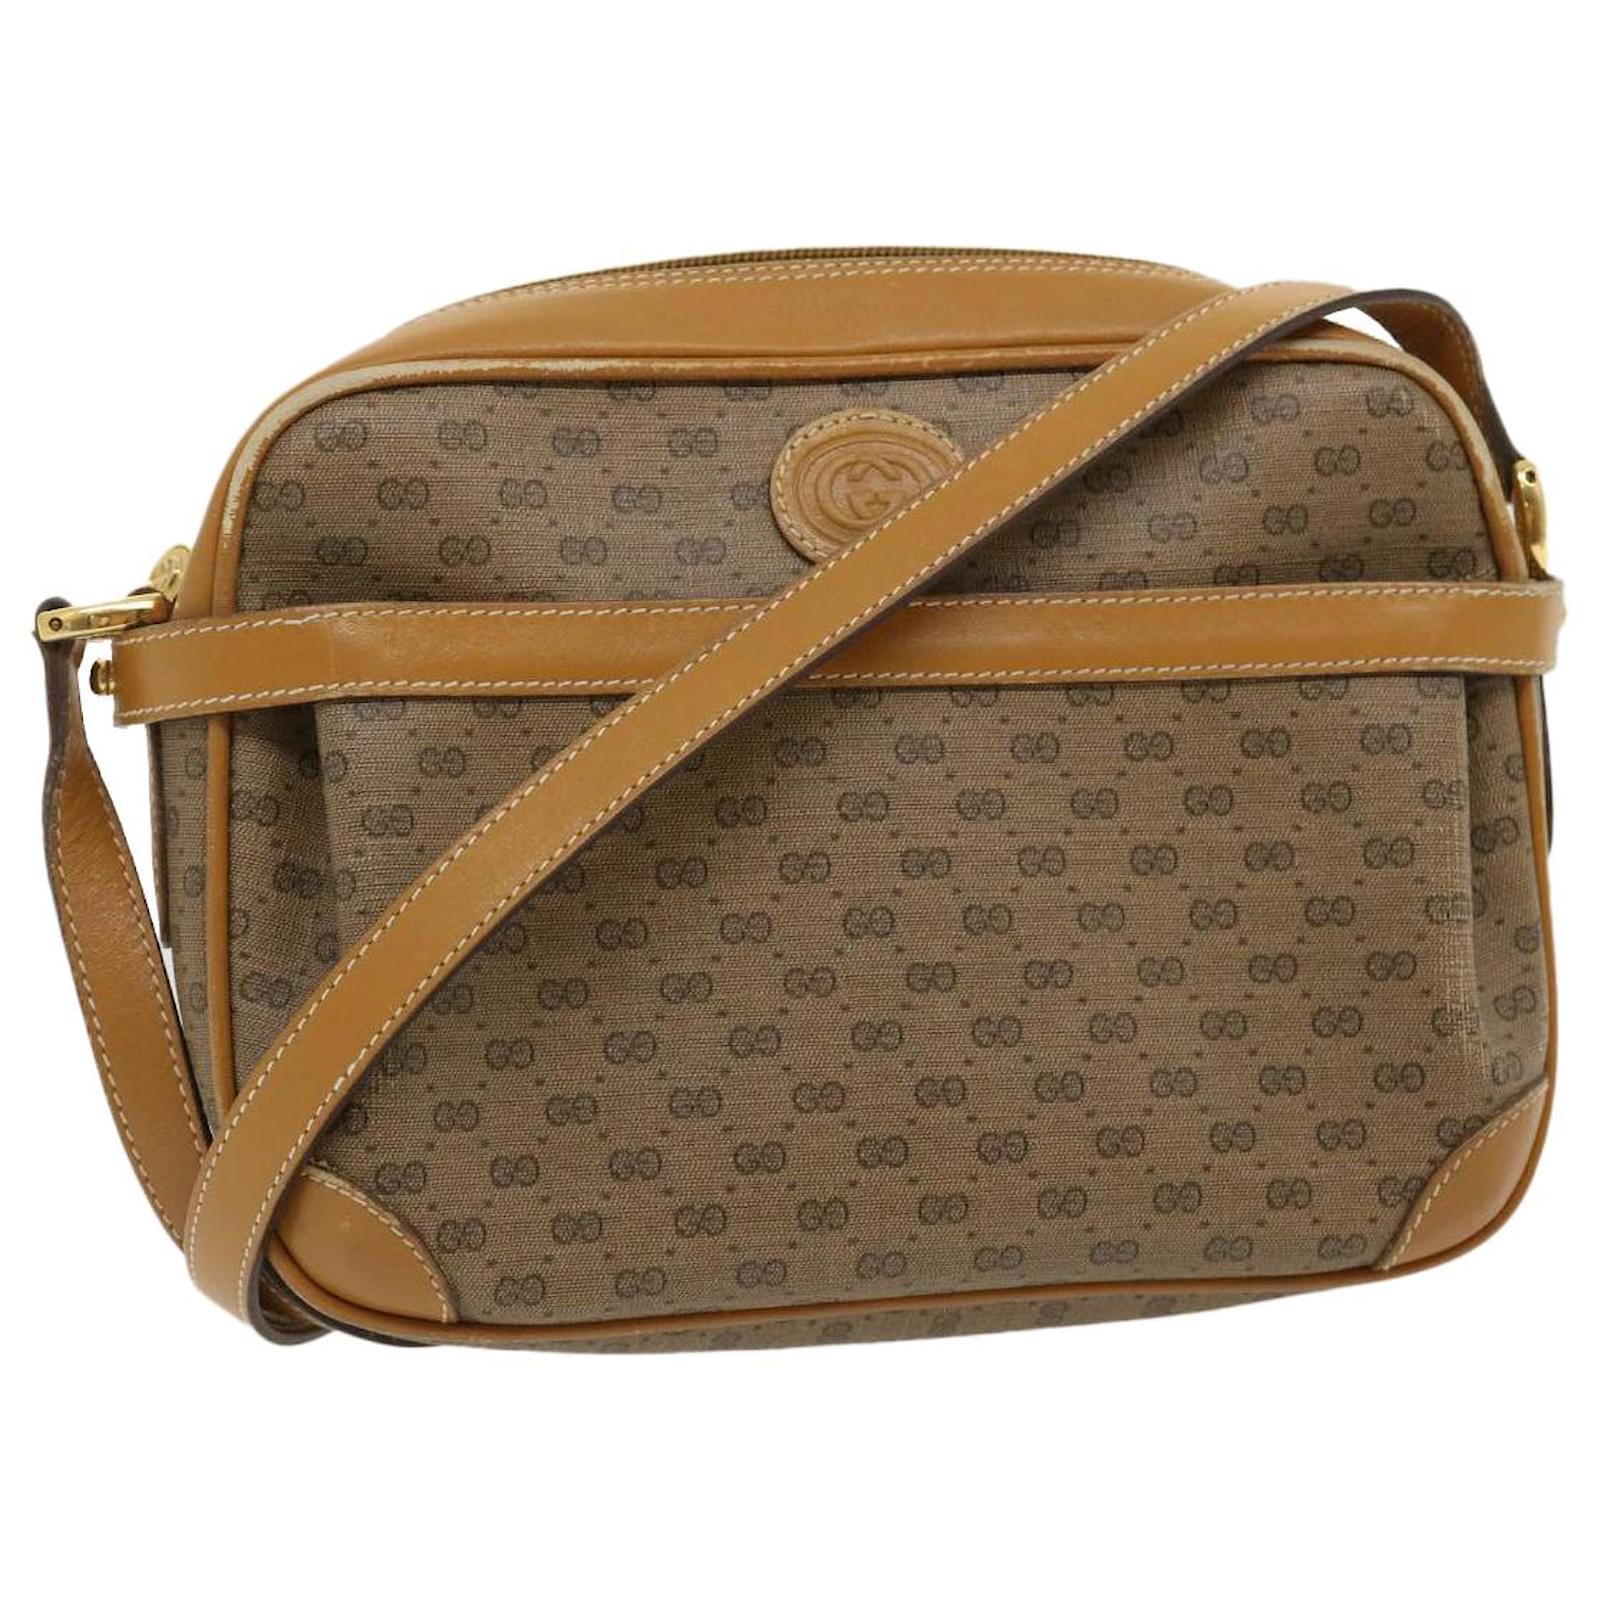 GUCCI Micro GG Canvas Shoulder Bag PVC Leather Beige Brown Auth